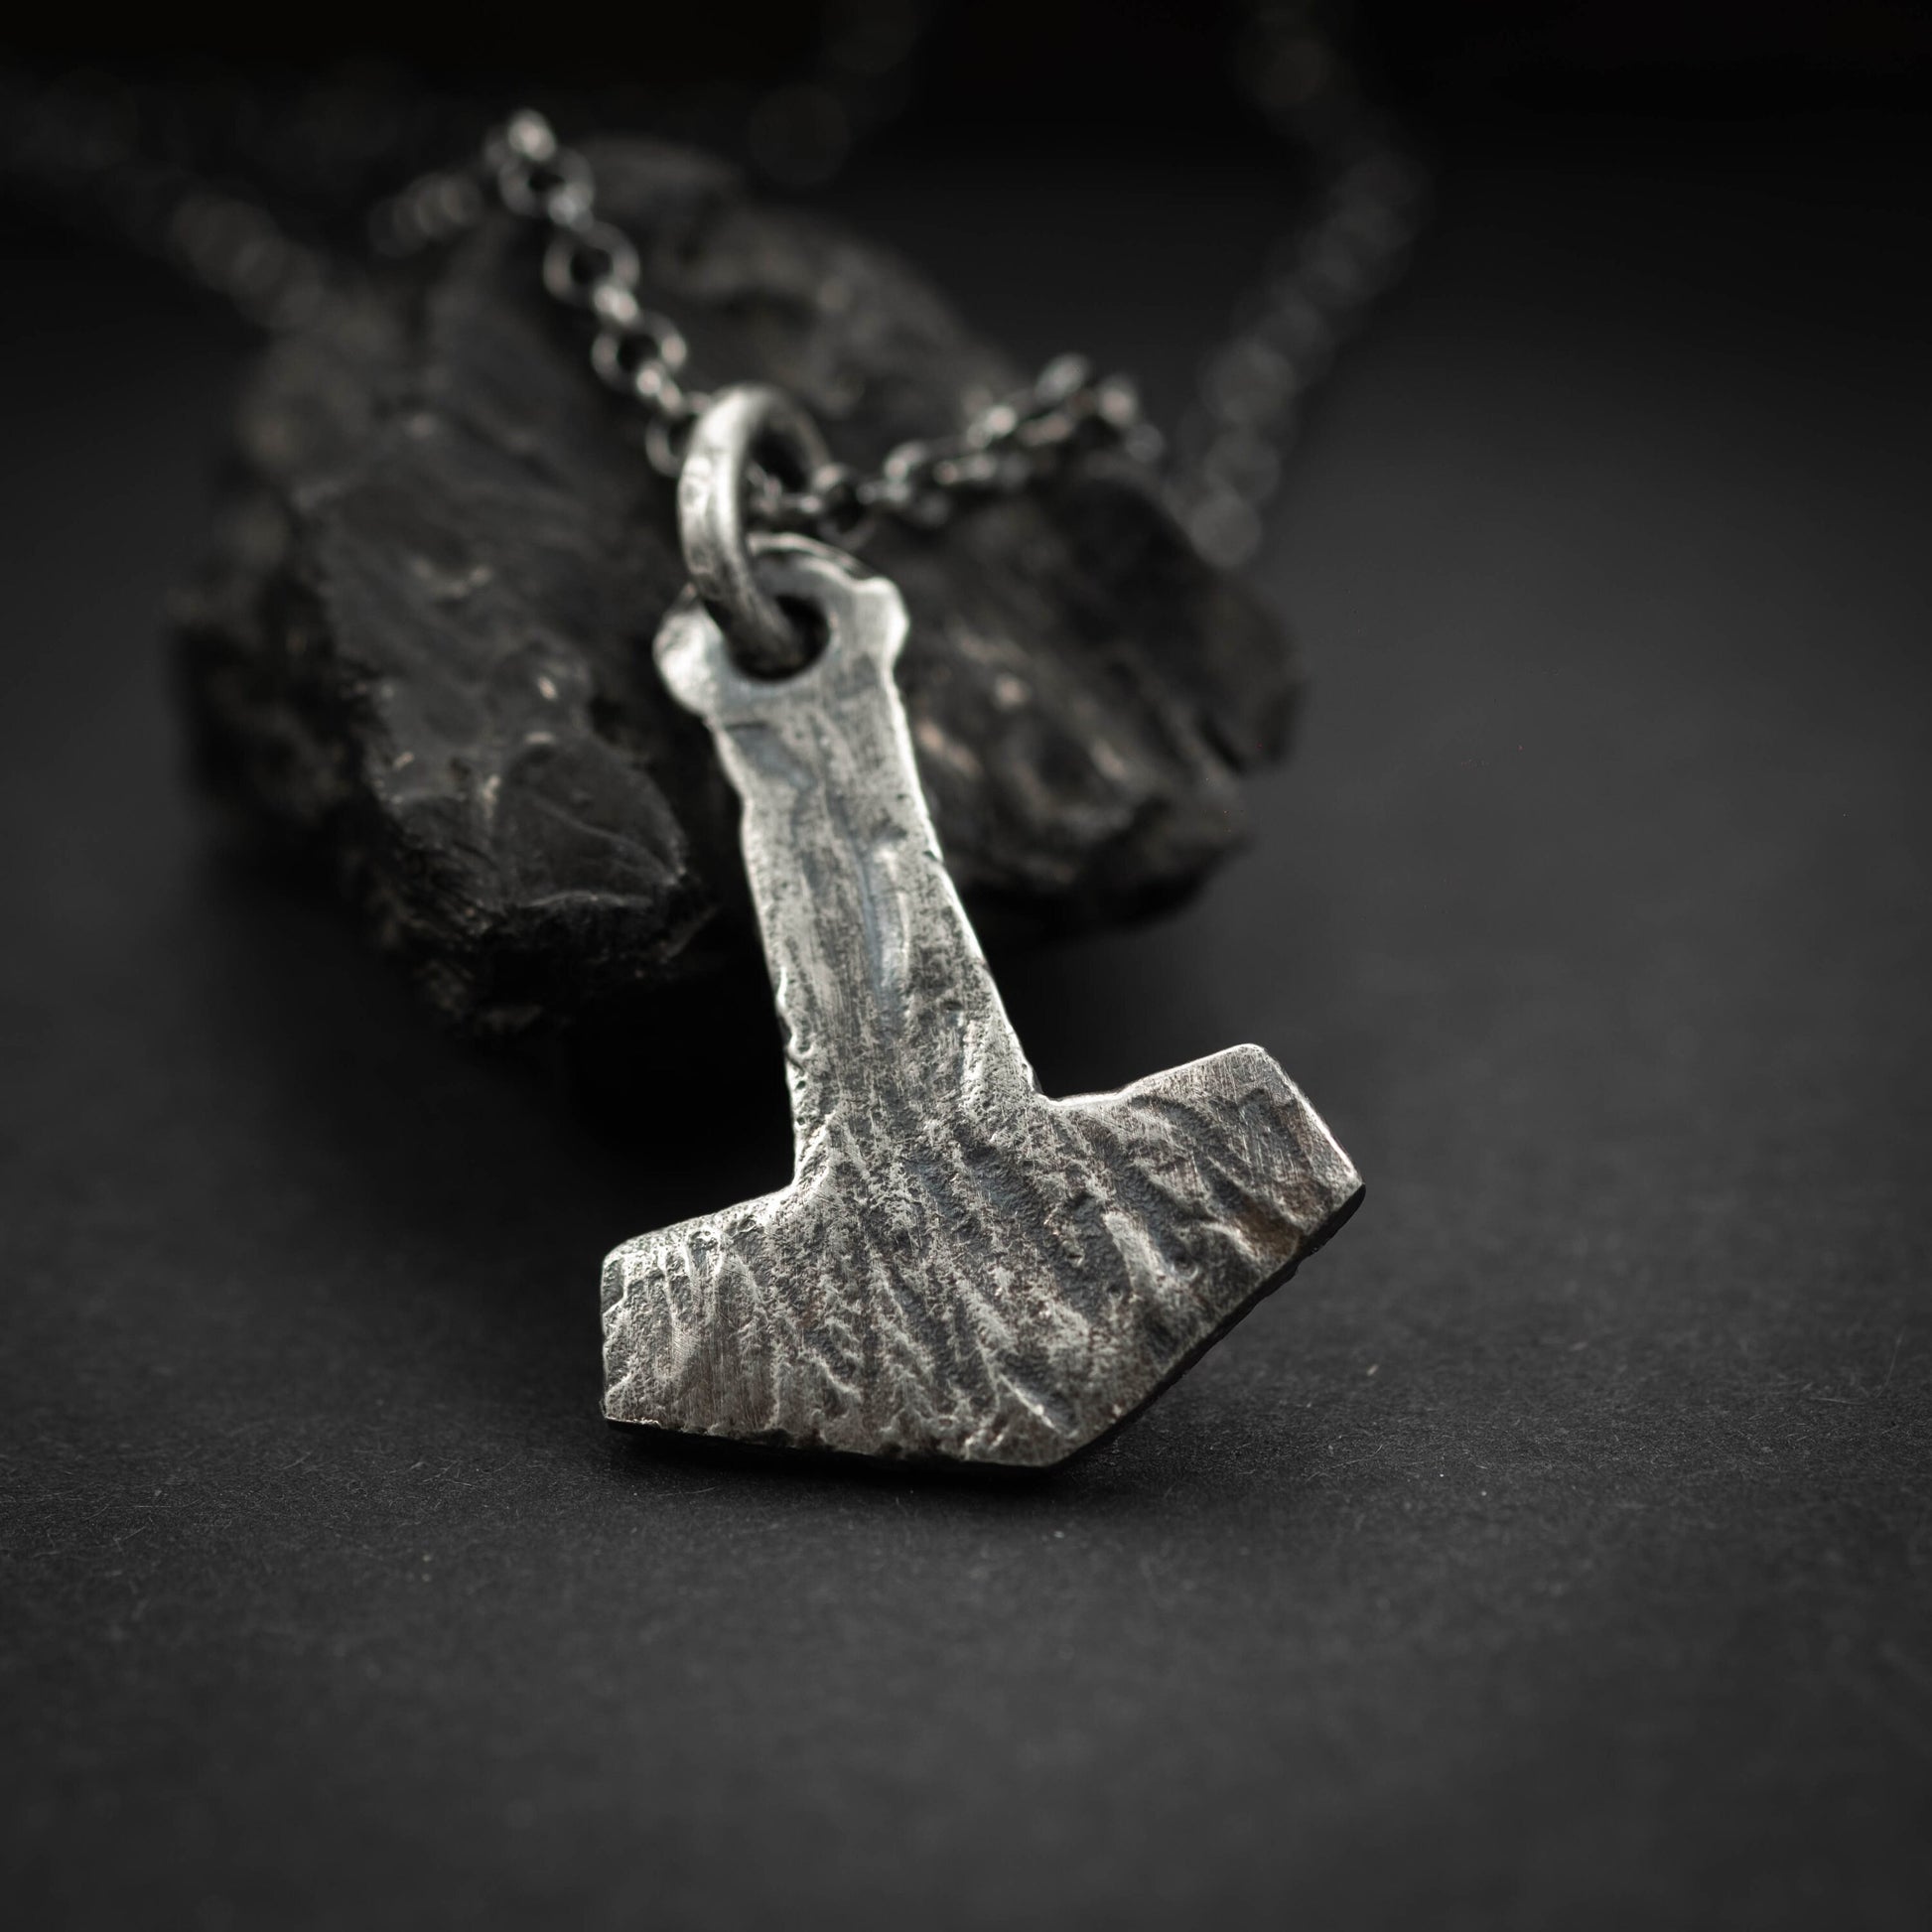 Mjolnir pendant, Viking jewelry, Thors War hammer pendant necklace, celtic jewelry Gift for him, Boyfriend gifts, Norse jewelry, mens gift